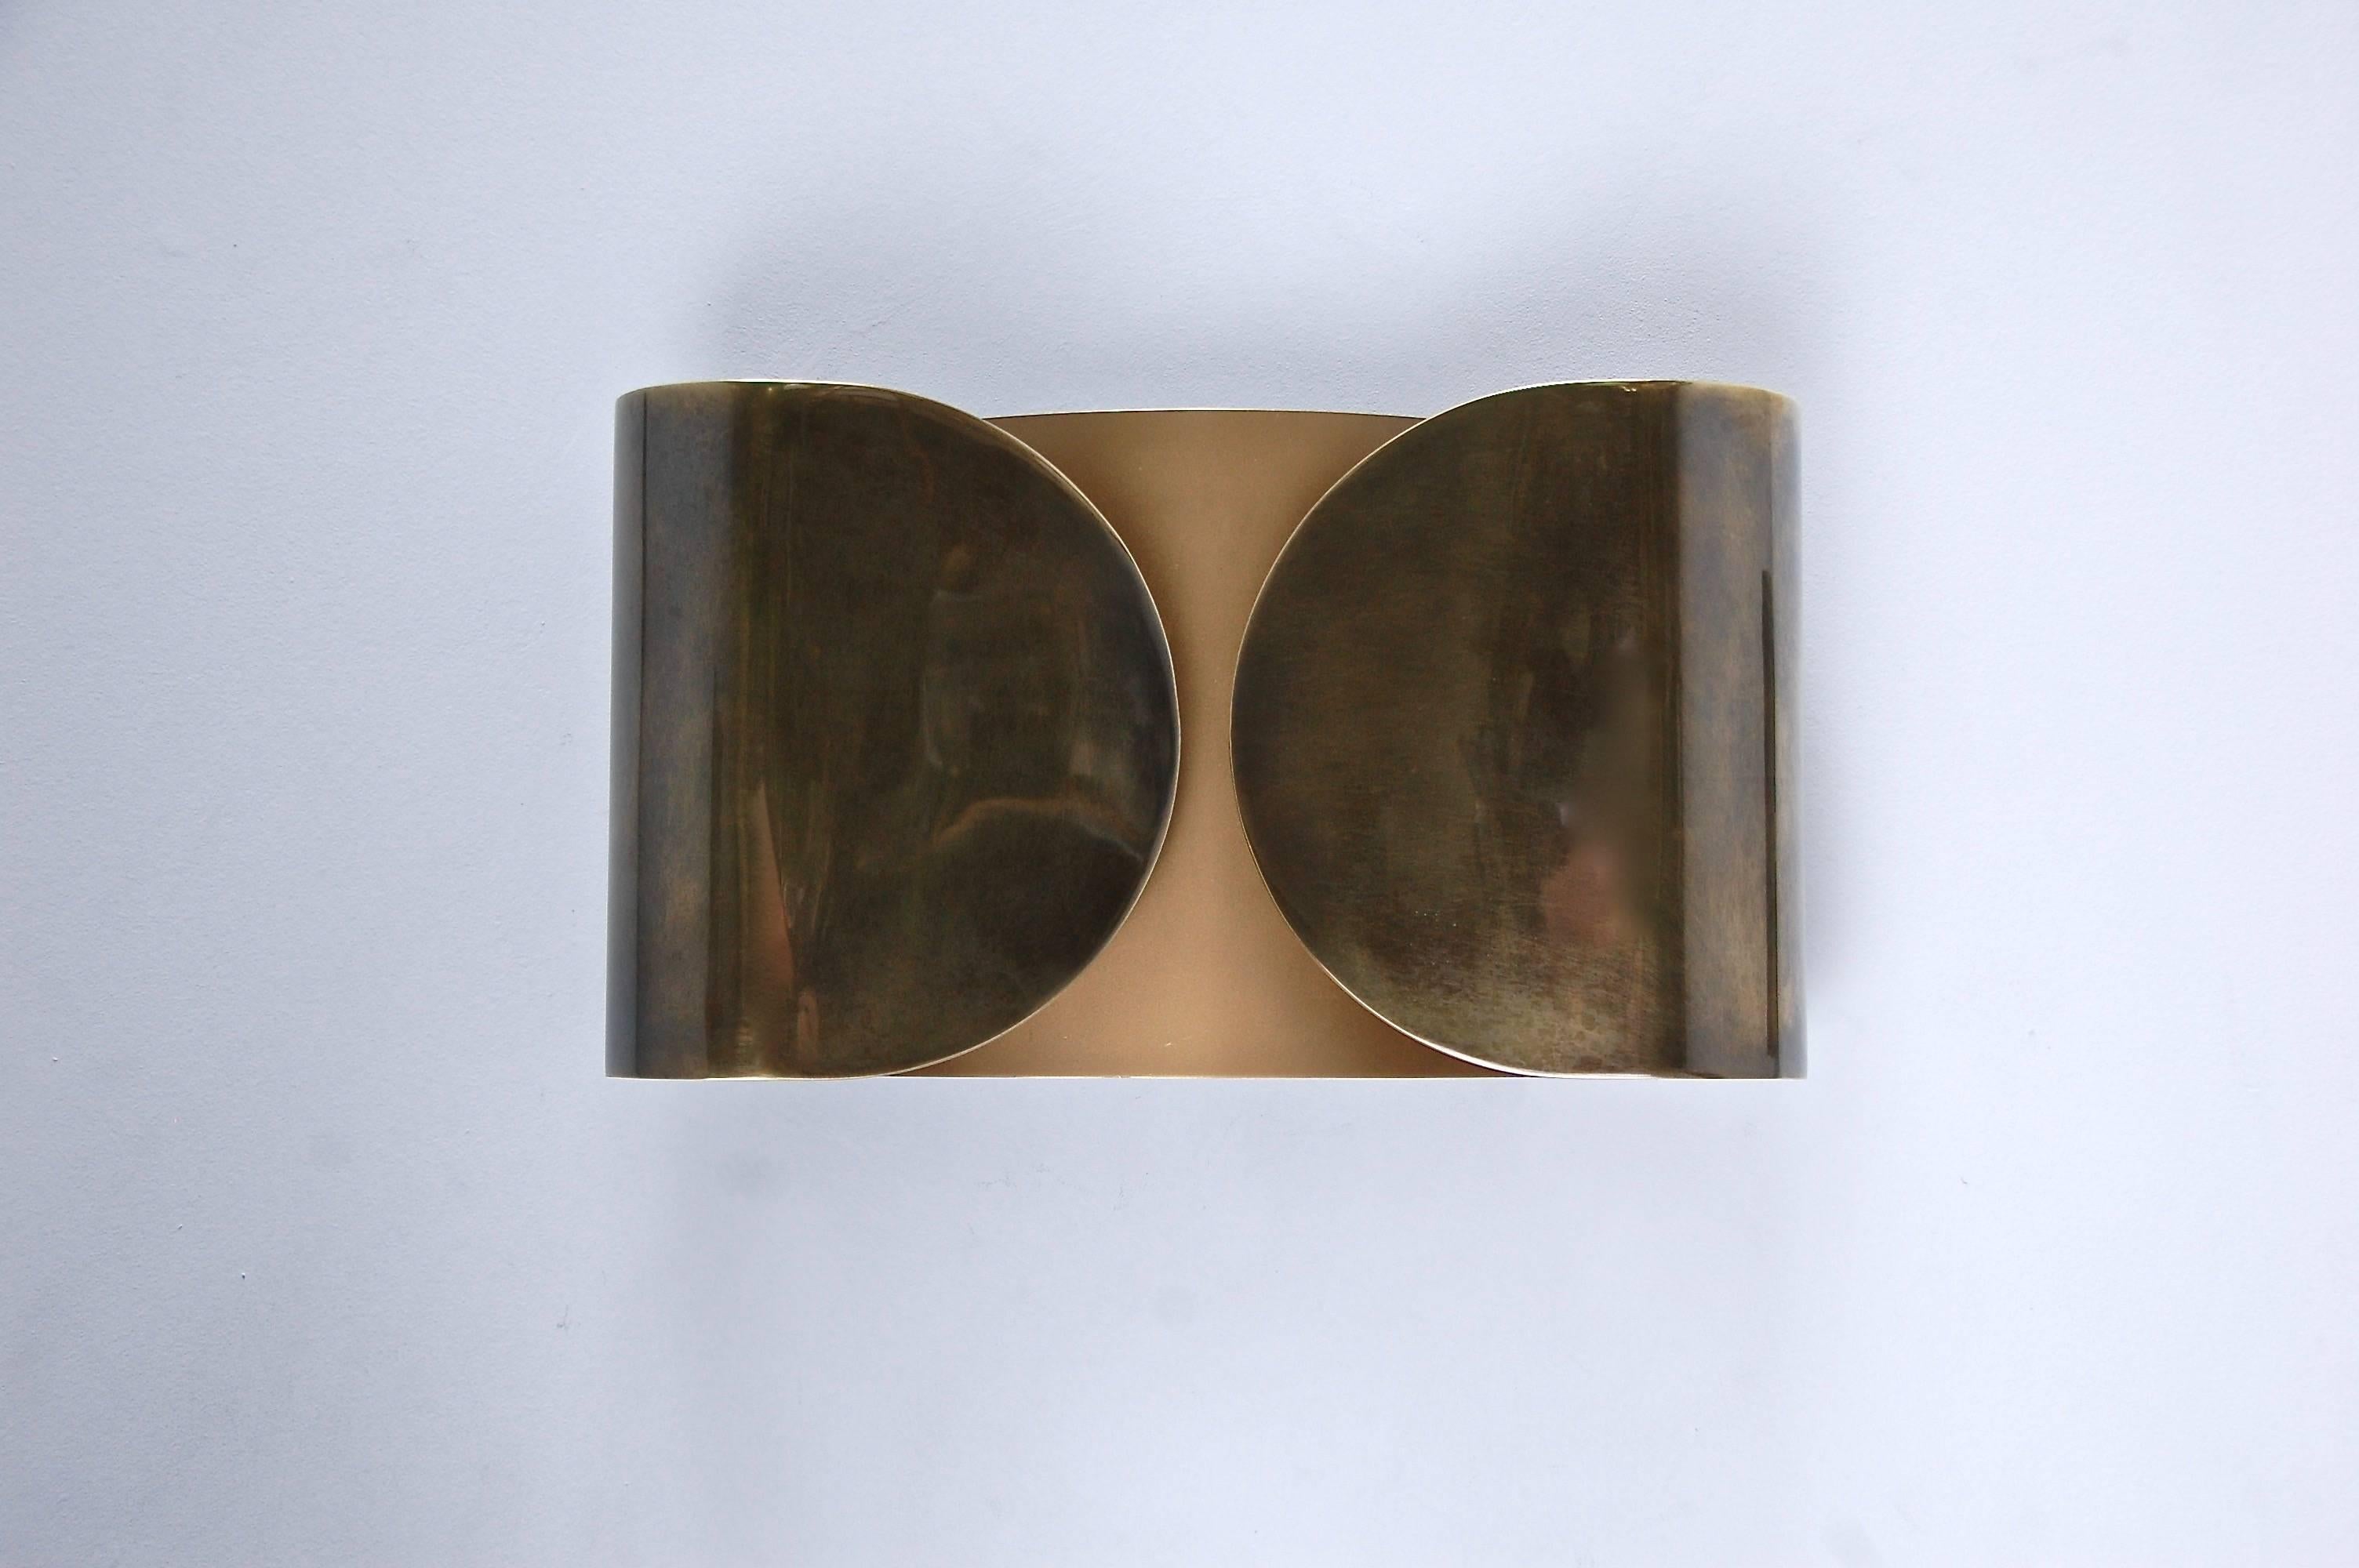 Modern and sleek pair of Foglio sconces by Tobia Scarpa in brass-plated patinated steel, with a painted interior. Fully restored, refinished and rewired for the US. Ready to be installed.